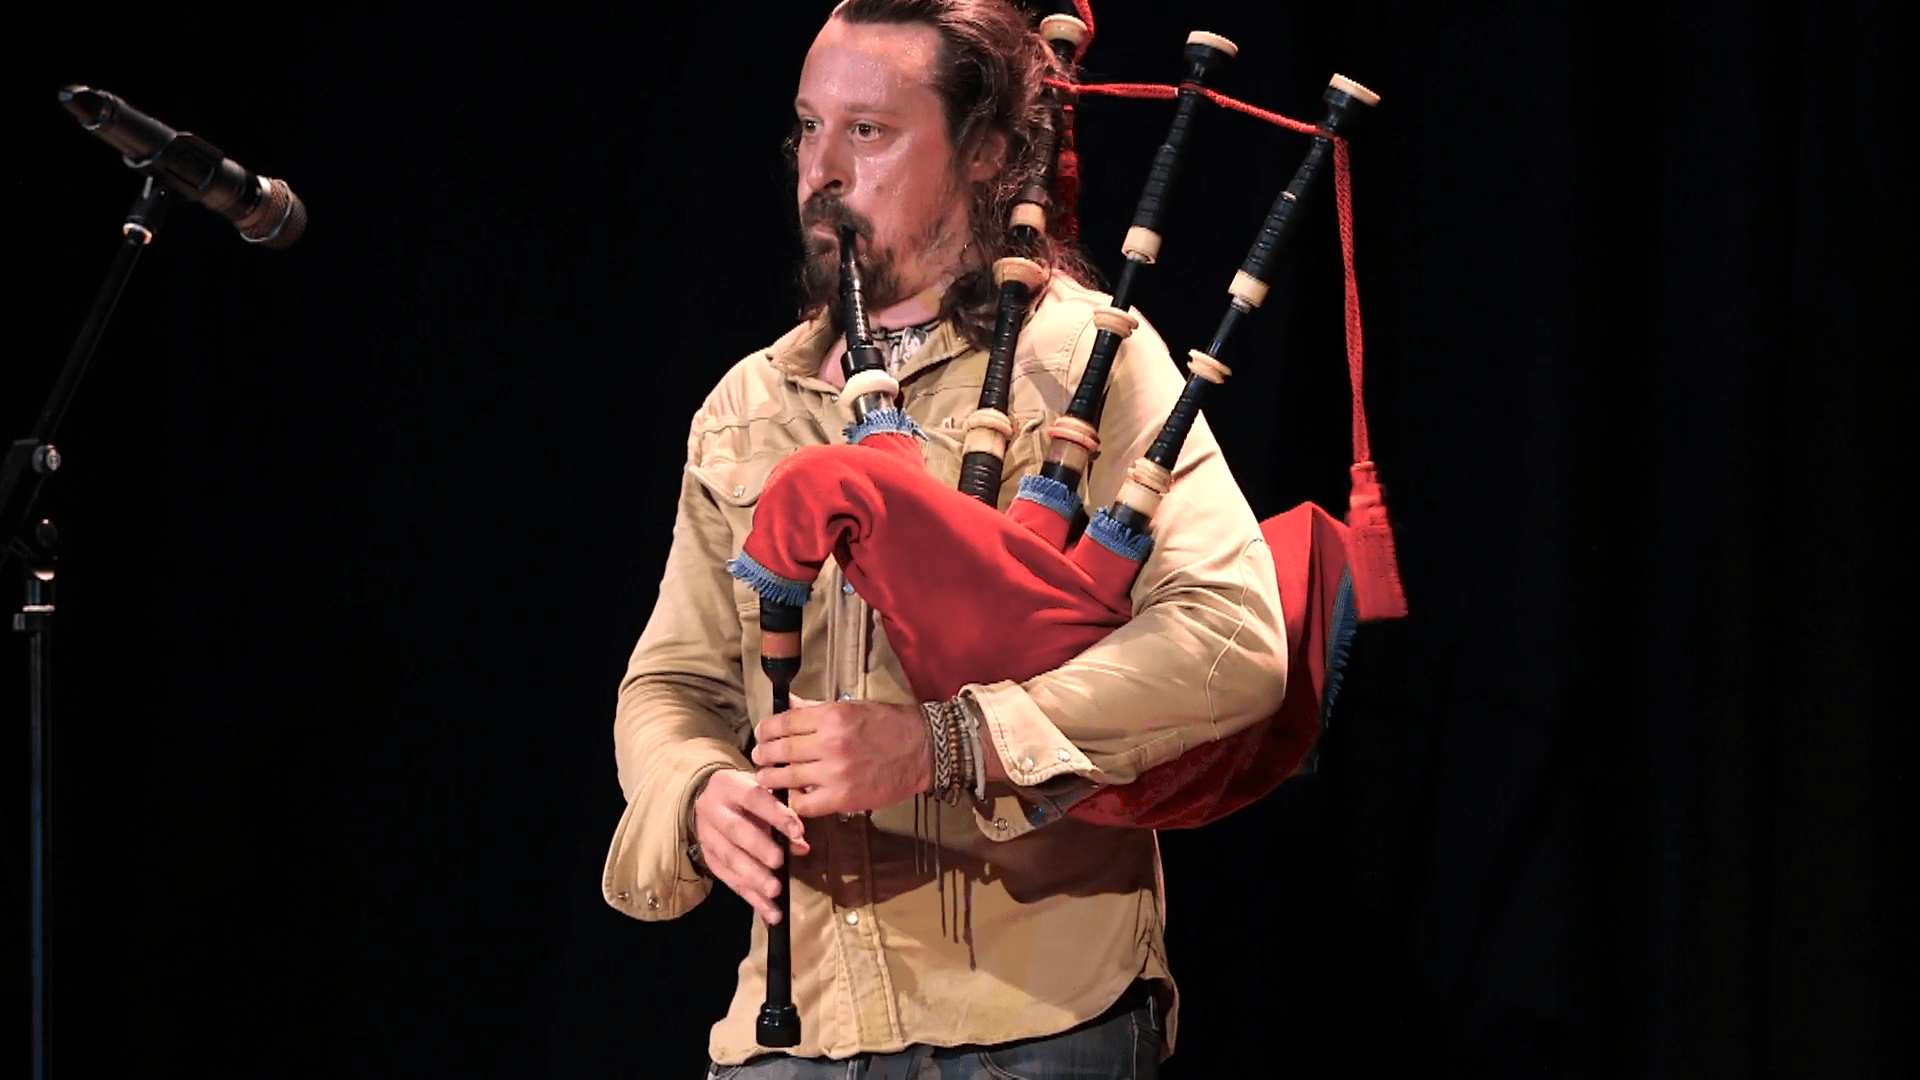 Ross Ainslie performs Thunderstruck by ACDC, arranged by legendary piper Gordon Duncan, streamed live by Inner Ear for the National Piping Centre during Piping Live 2023